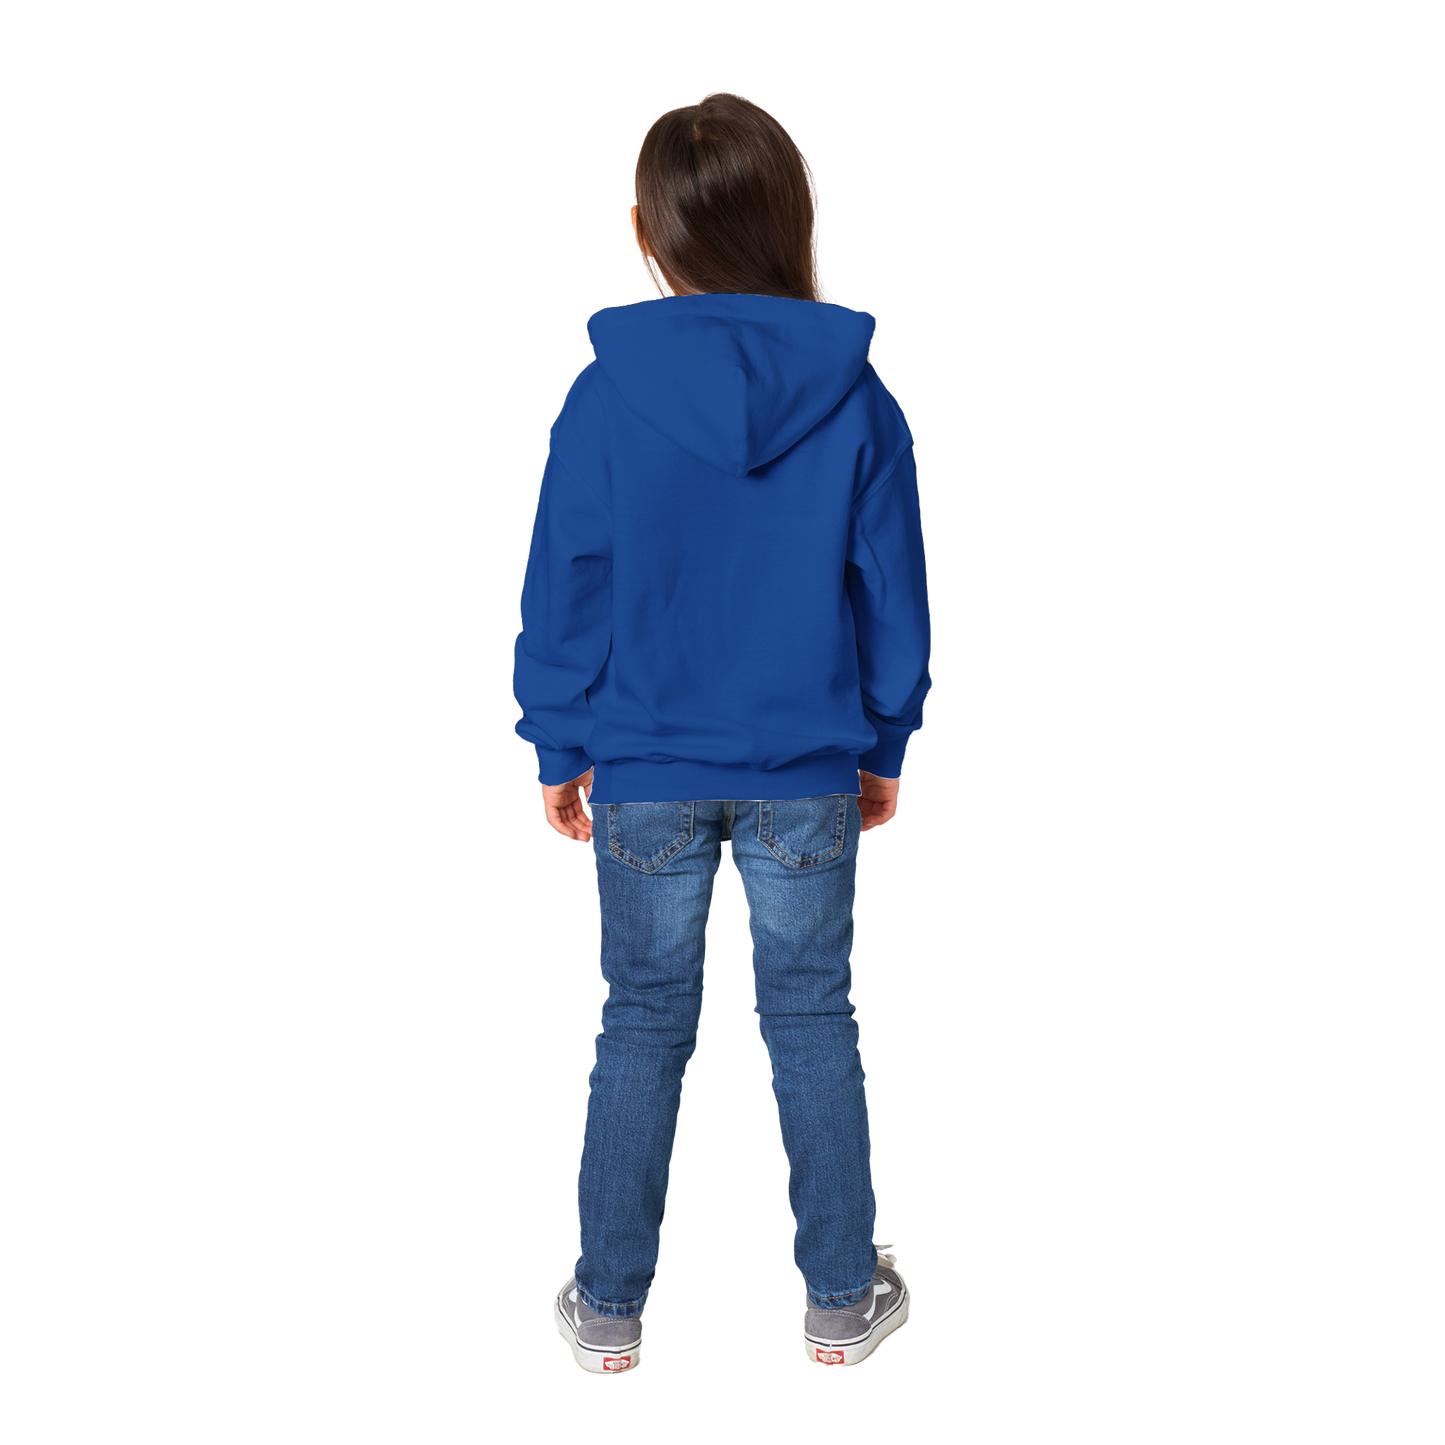 Peter's 50th Anniversary Classic Kids Pullover Hoodie